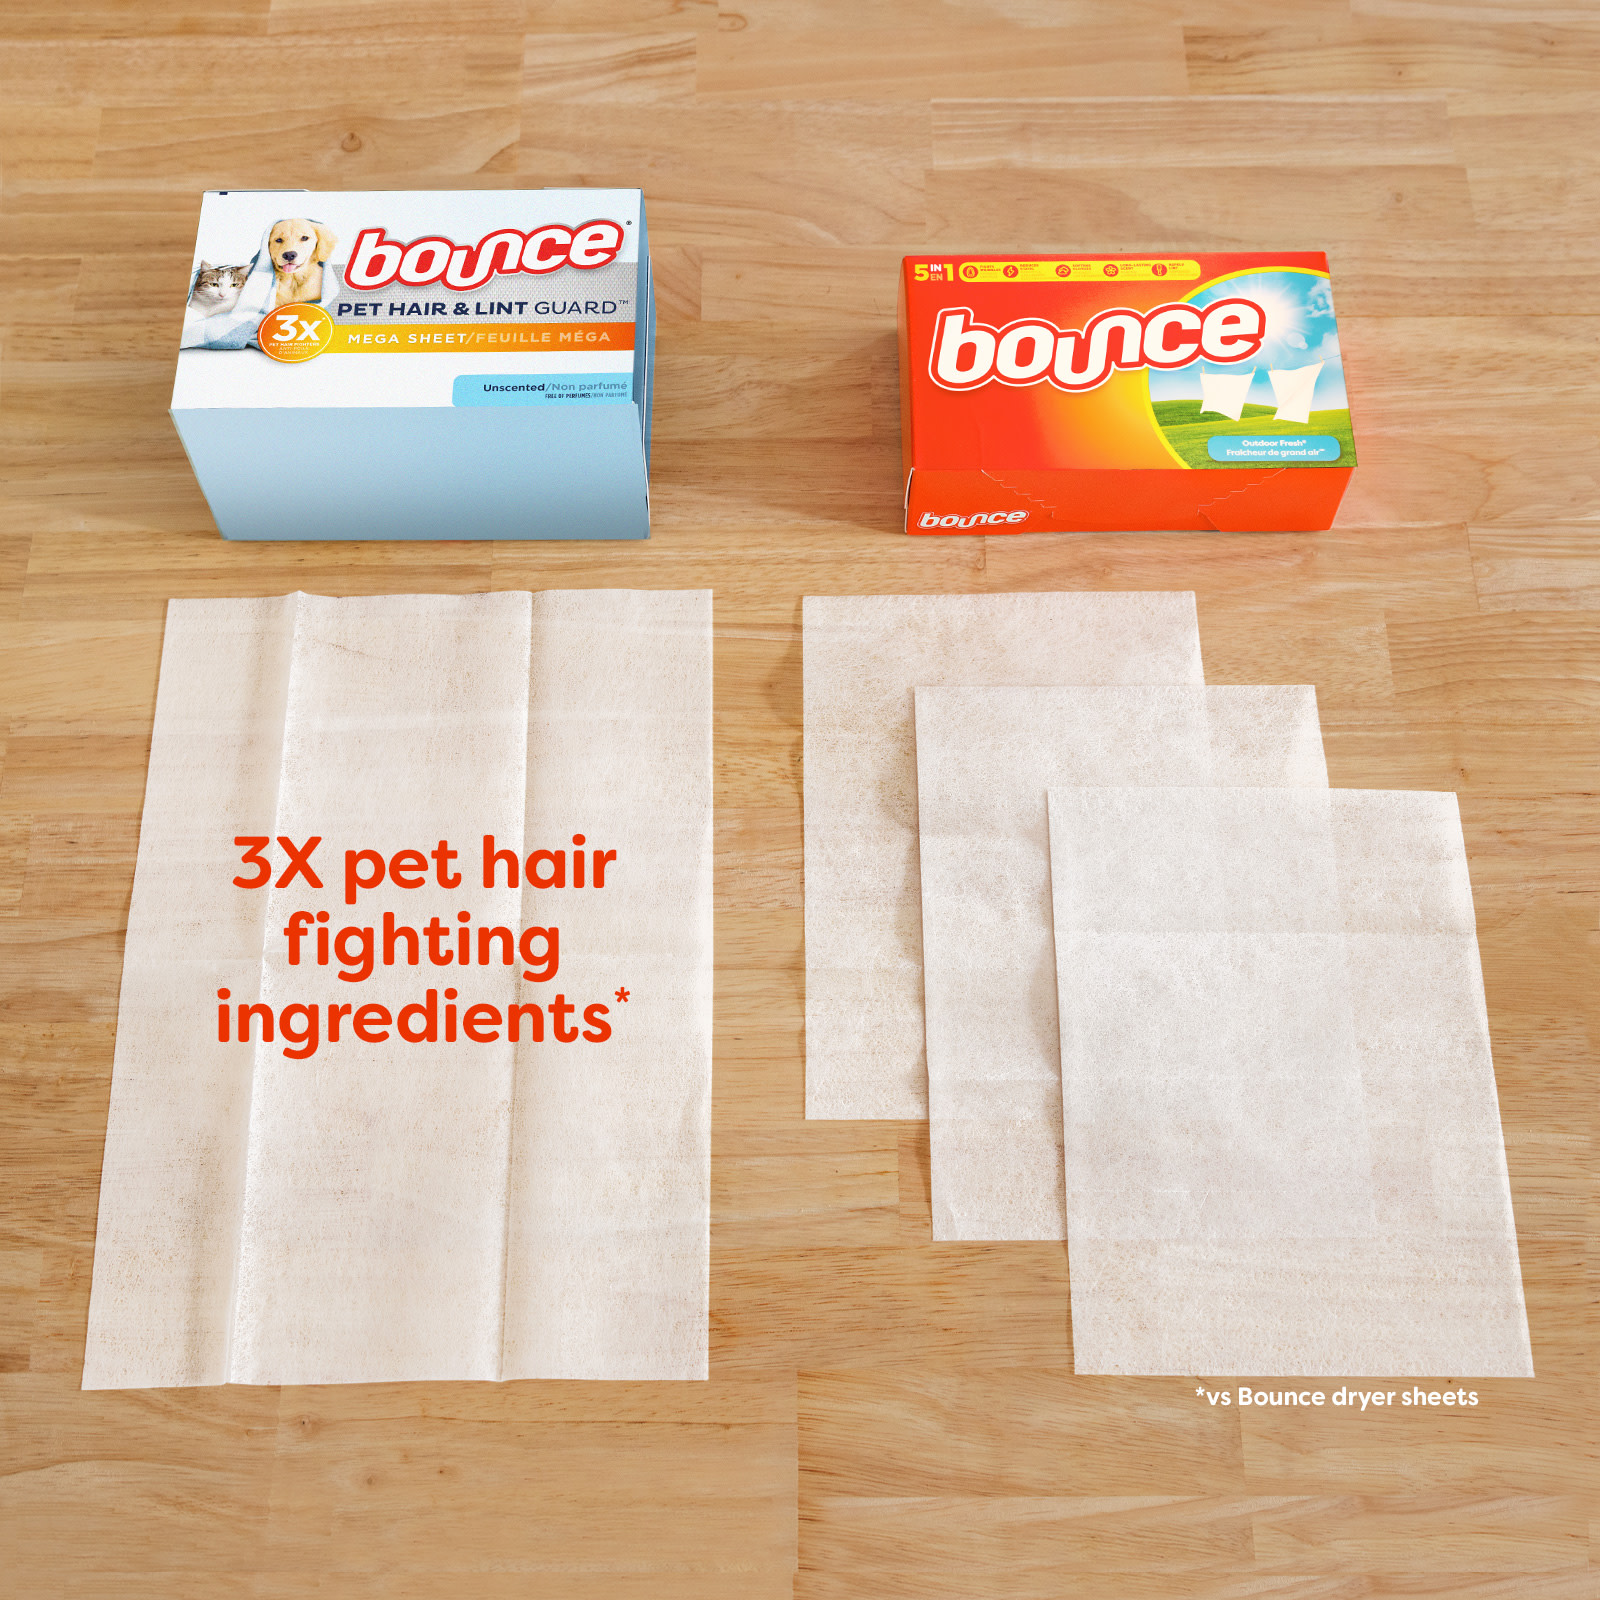 Bounce Pet Hair Unscented Dryer Sheets: 3X pet hair fighting ingredients